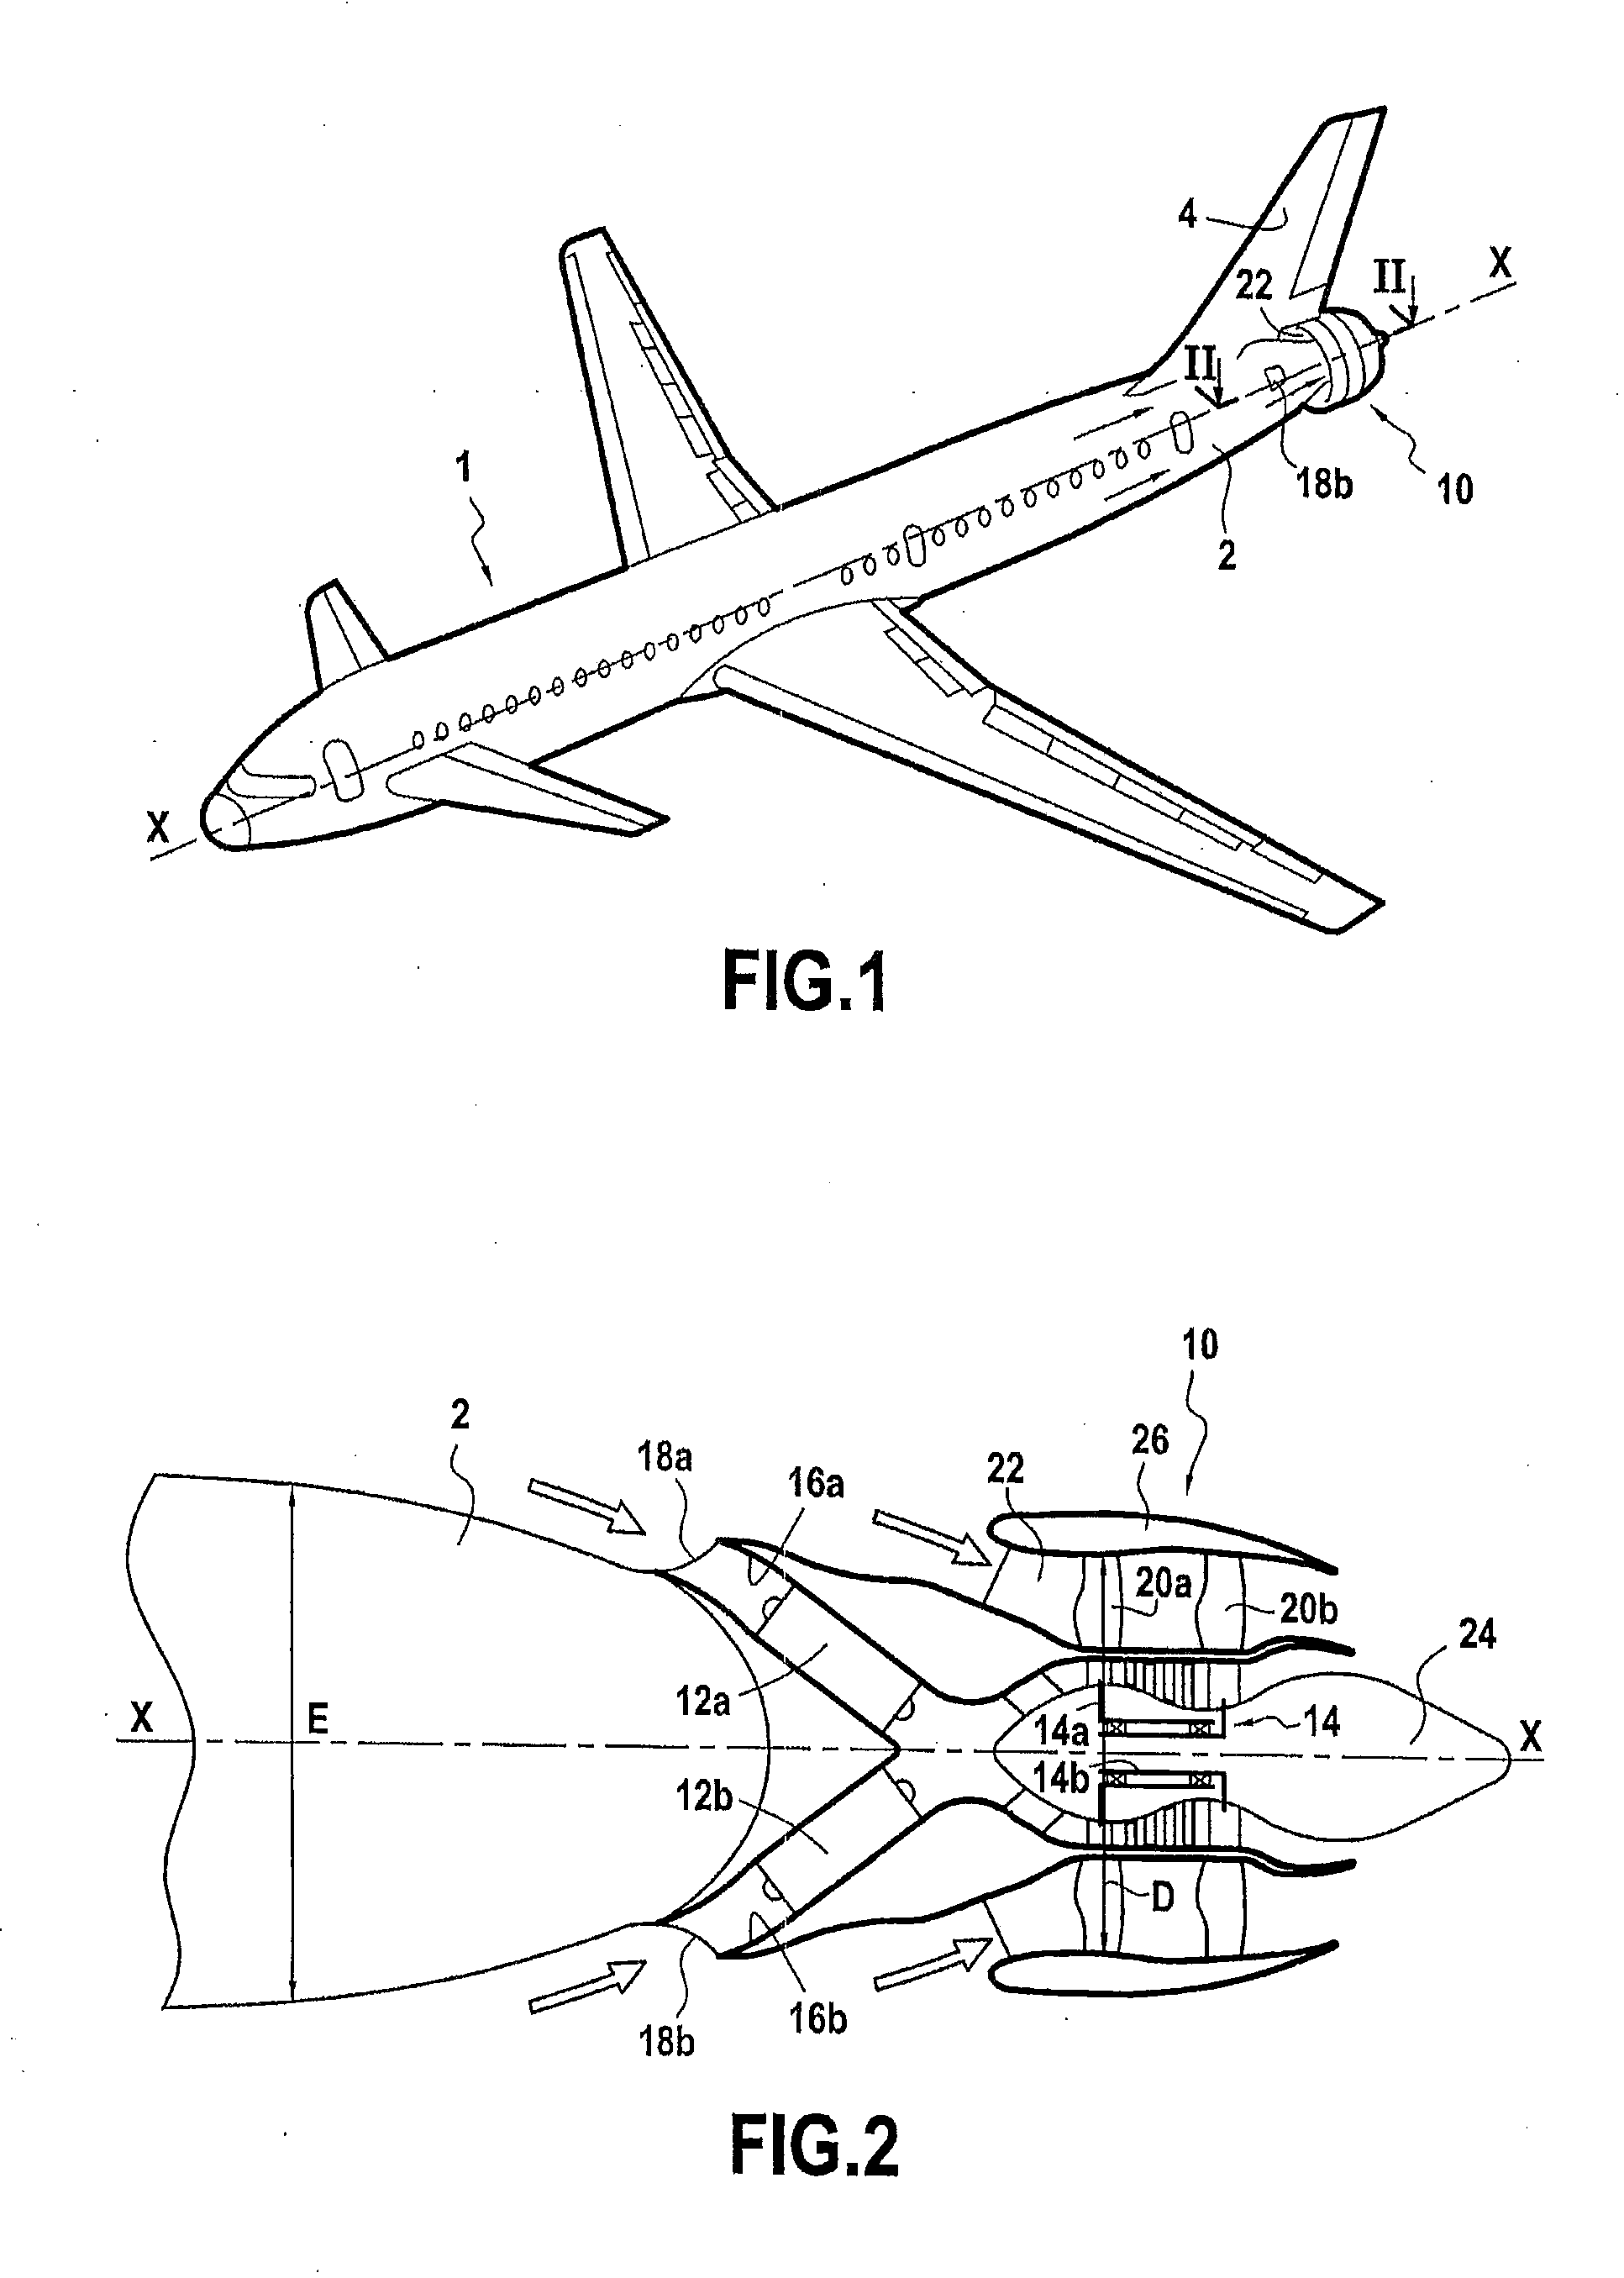 Aircraft propelled by a turbojet engine with contrarotating fans